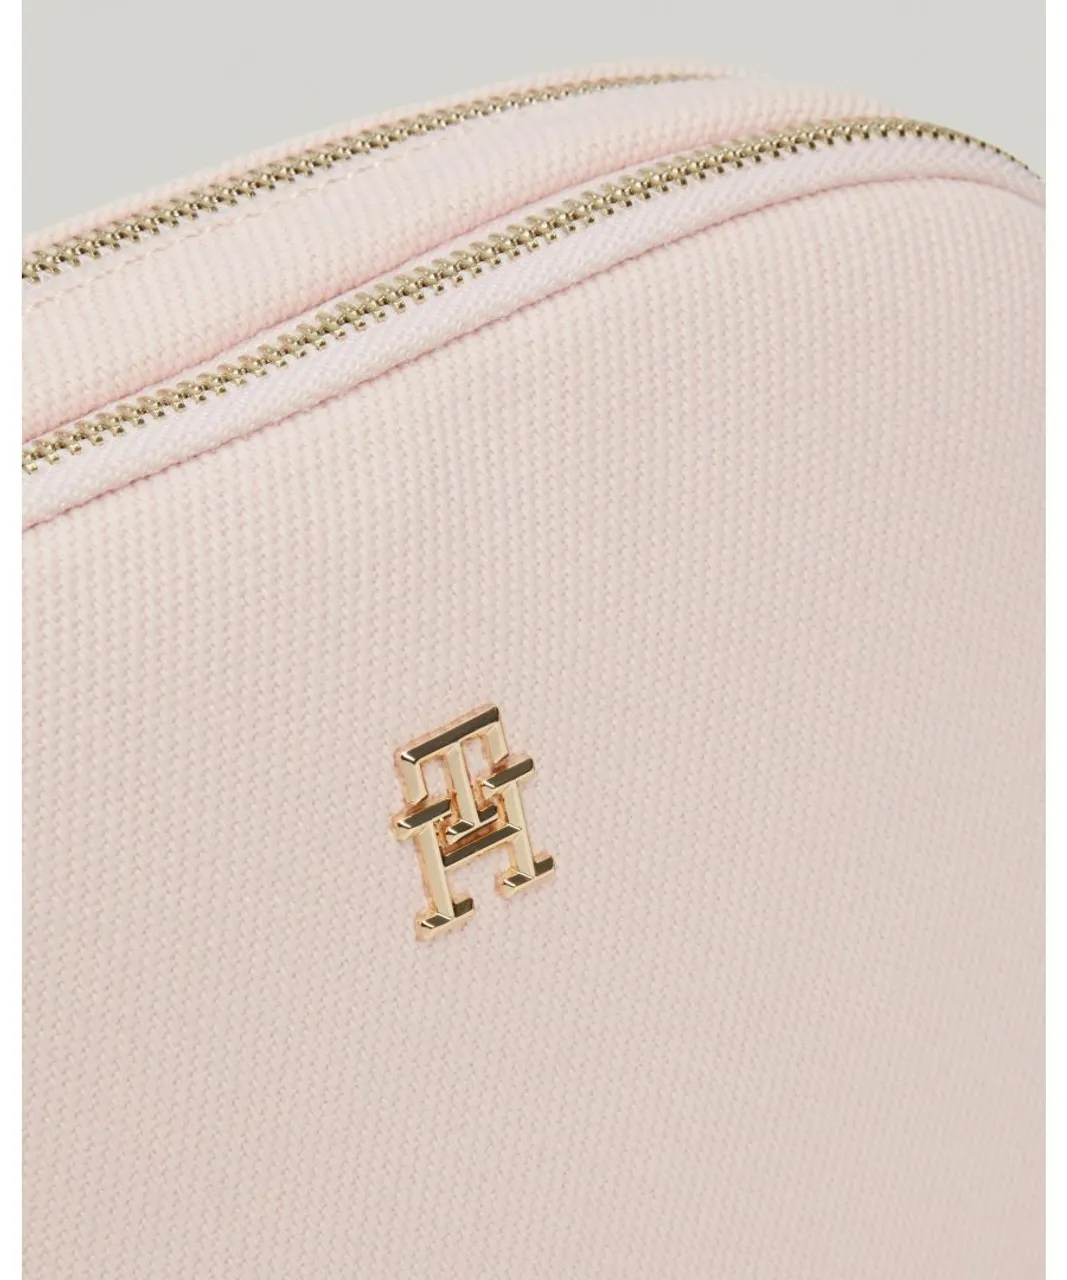 Tommy Hilfiger Poppy Womens Canvas Crossover Bag - Pink - One Size